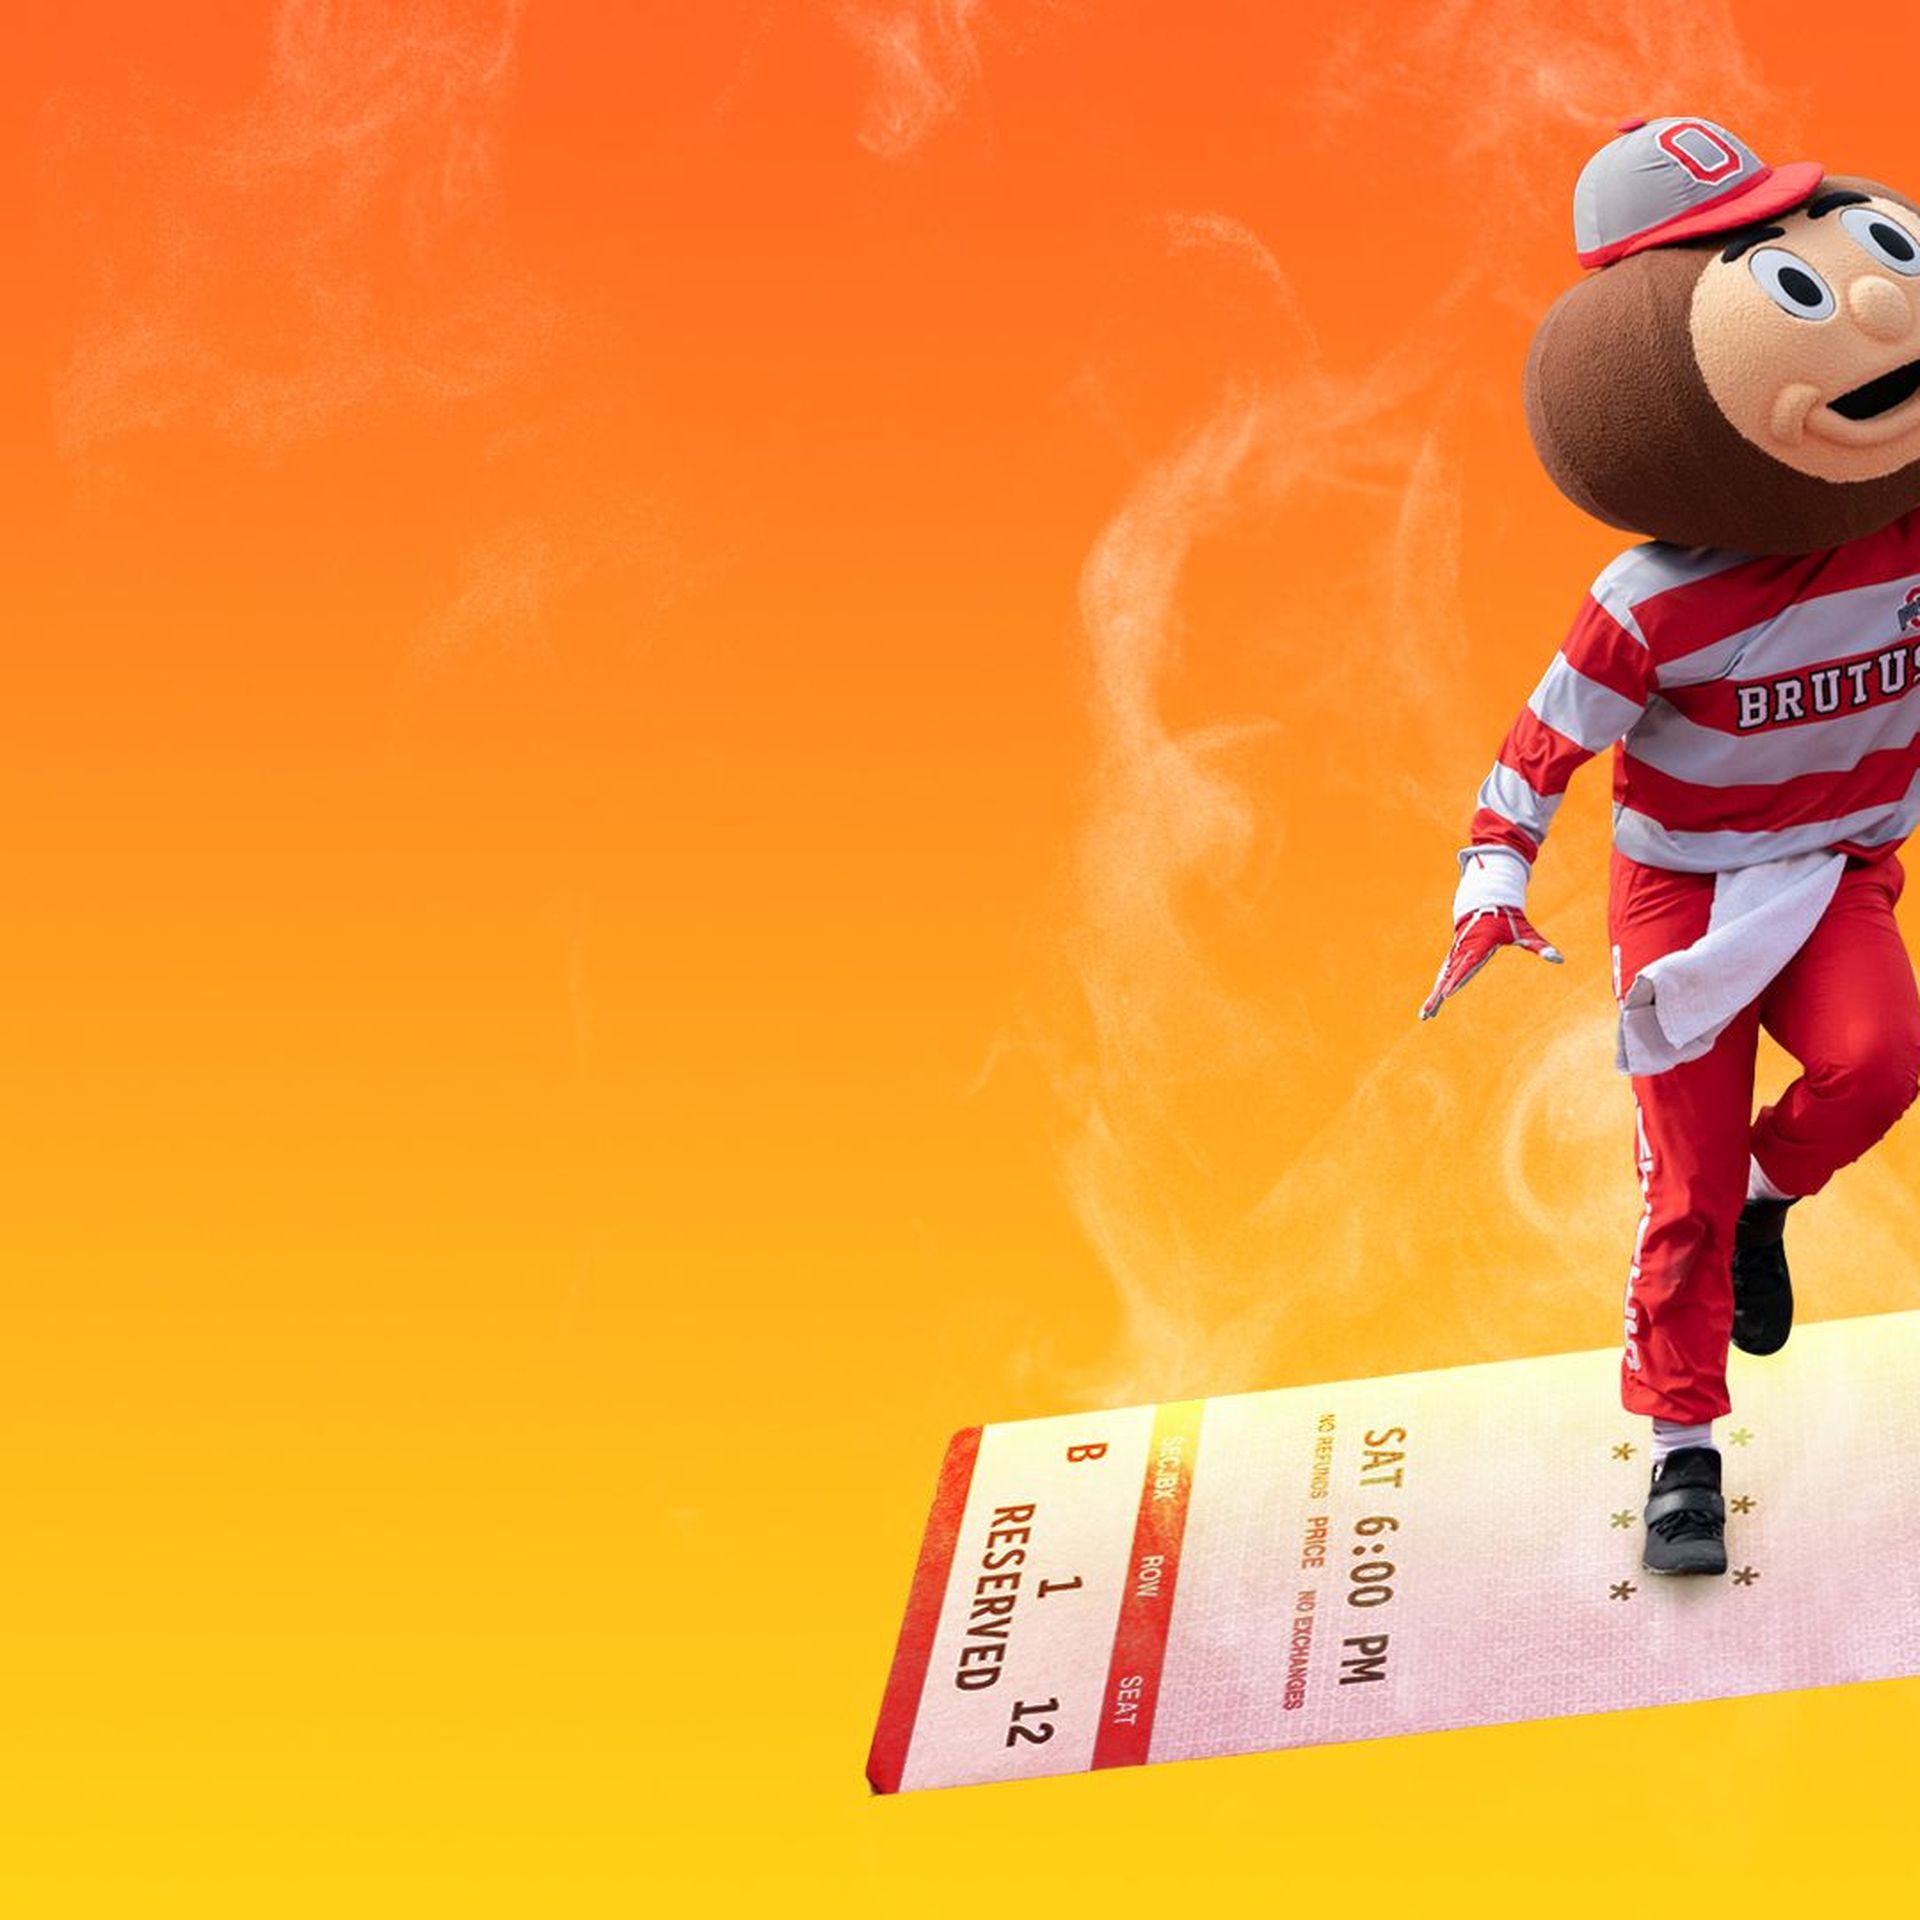 Illustration of Brutus the Ohio State mascot standing atop a large smoking ticket